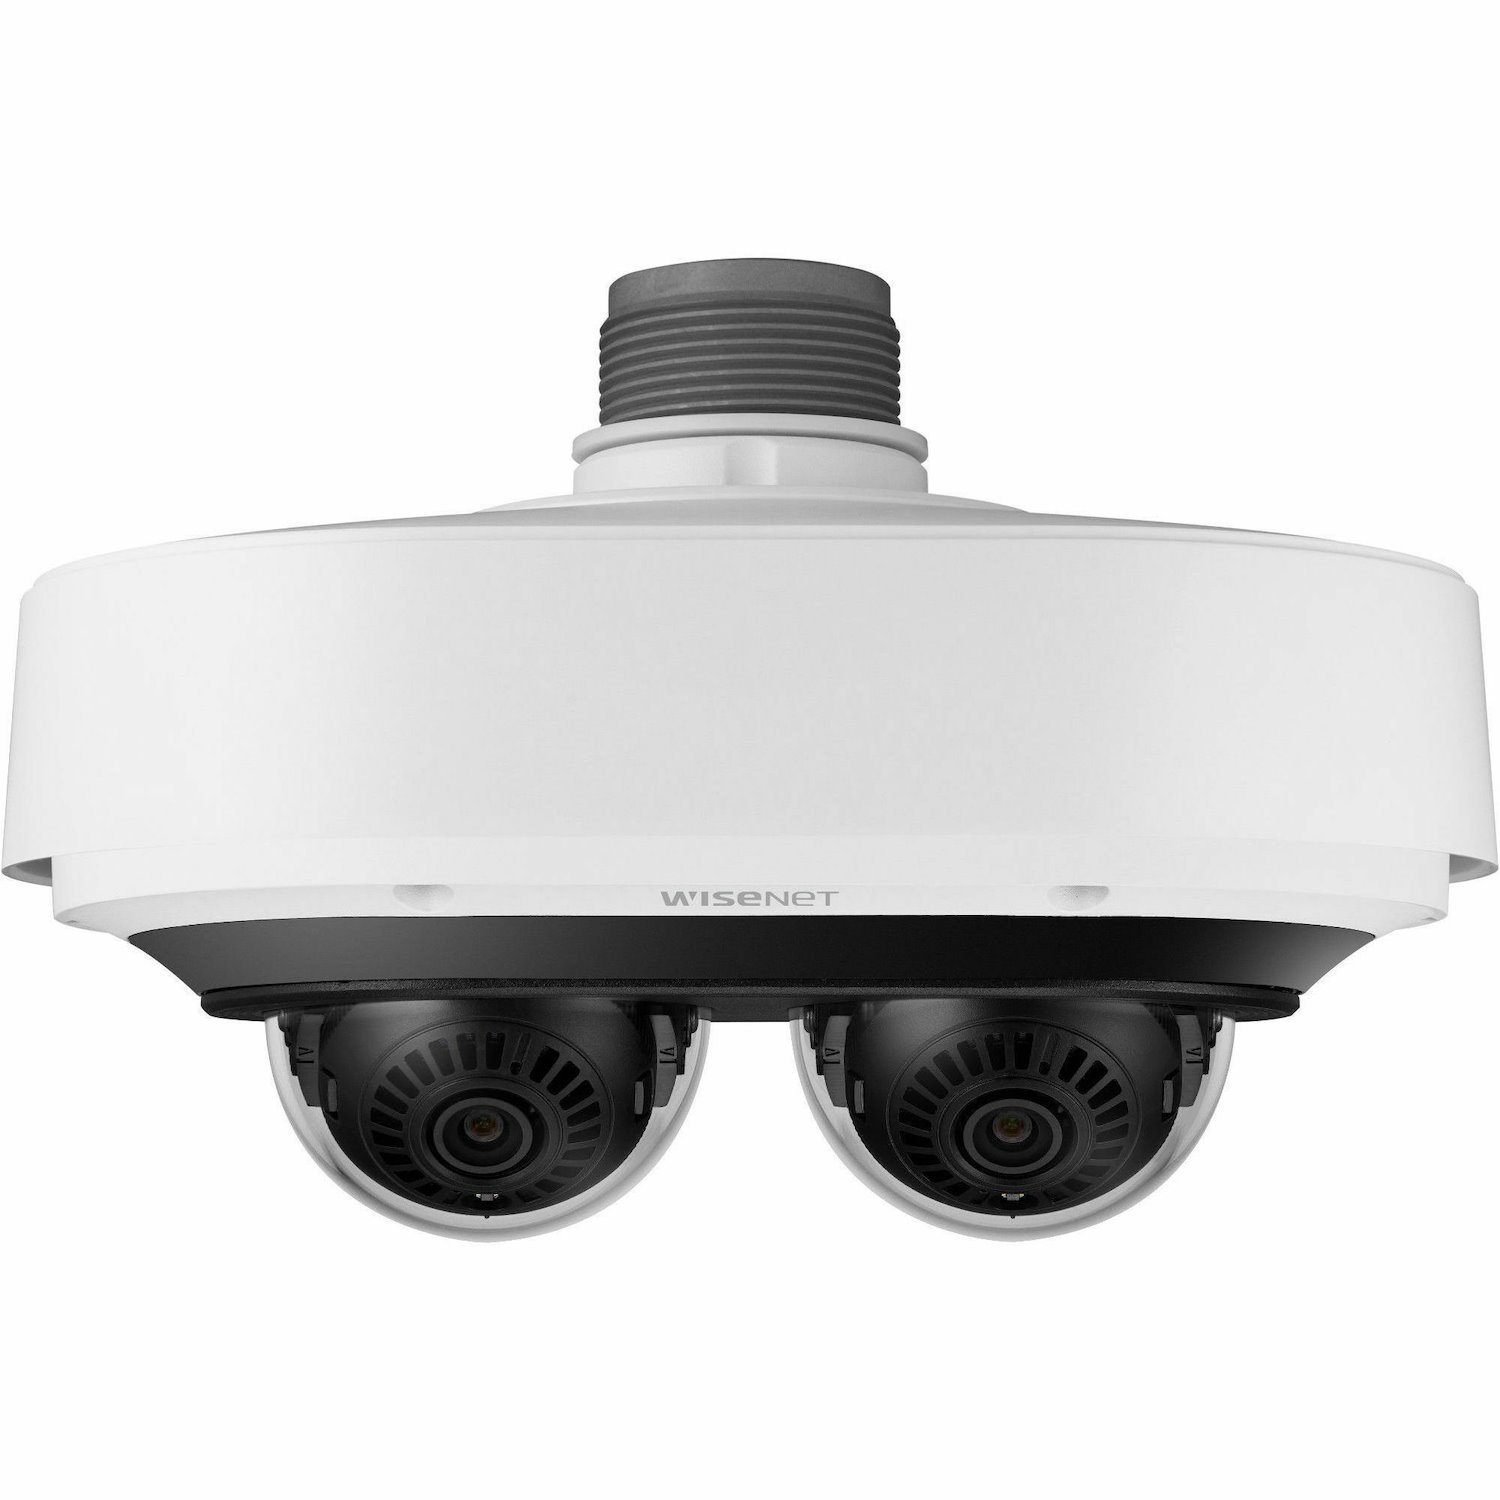 Wisenet PNM-7082RVD 2 Megapixel Outdoor Full HD Network Camera - Color - Dome - White